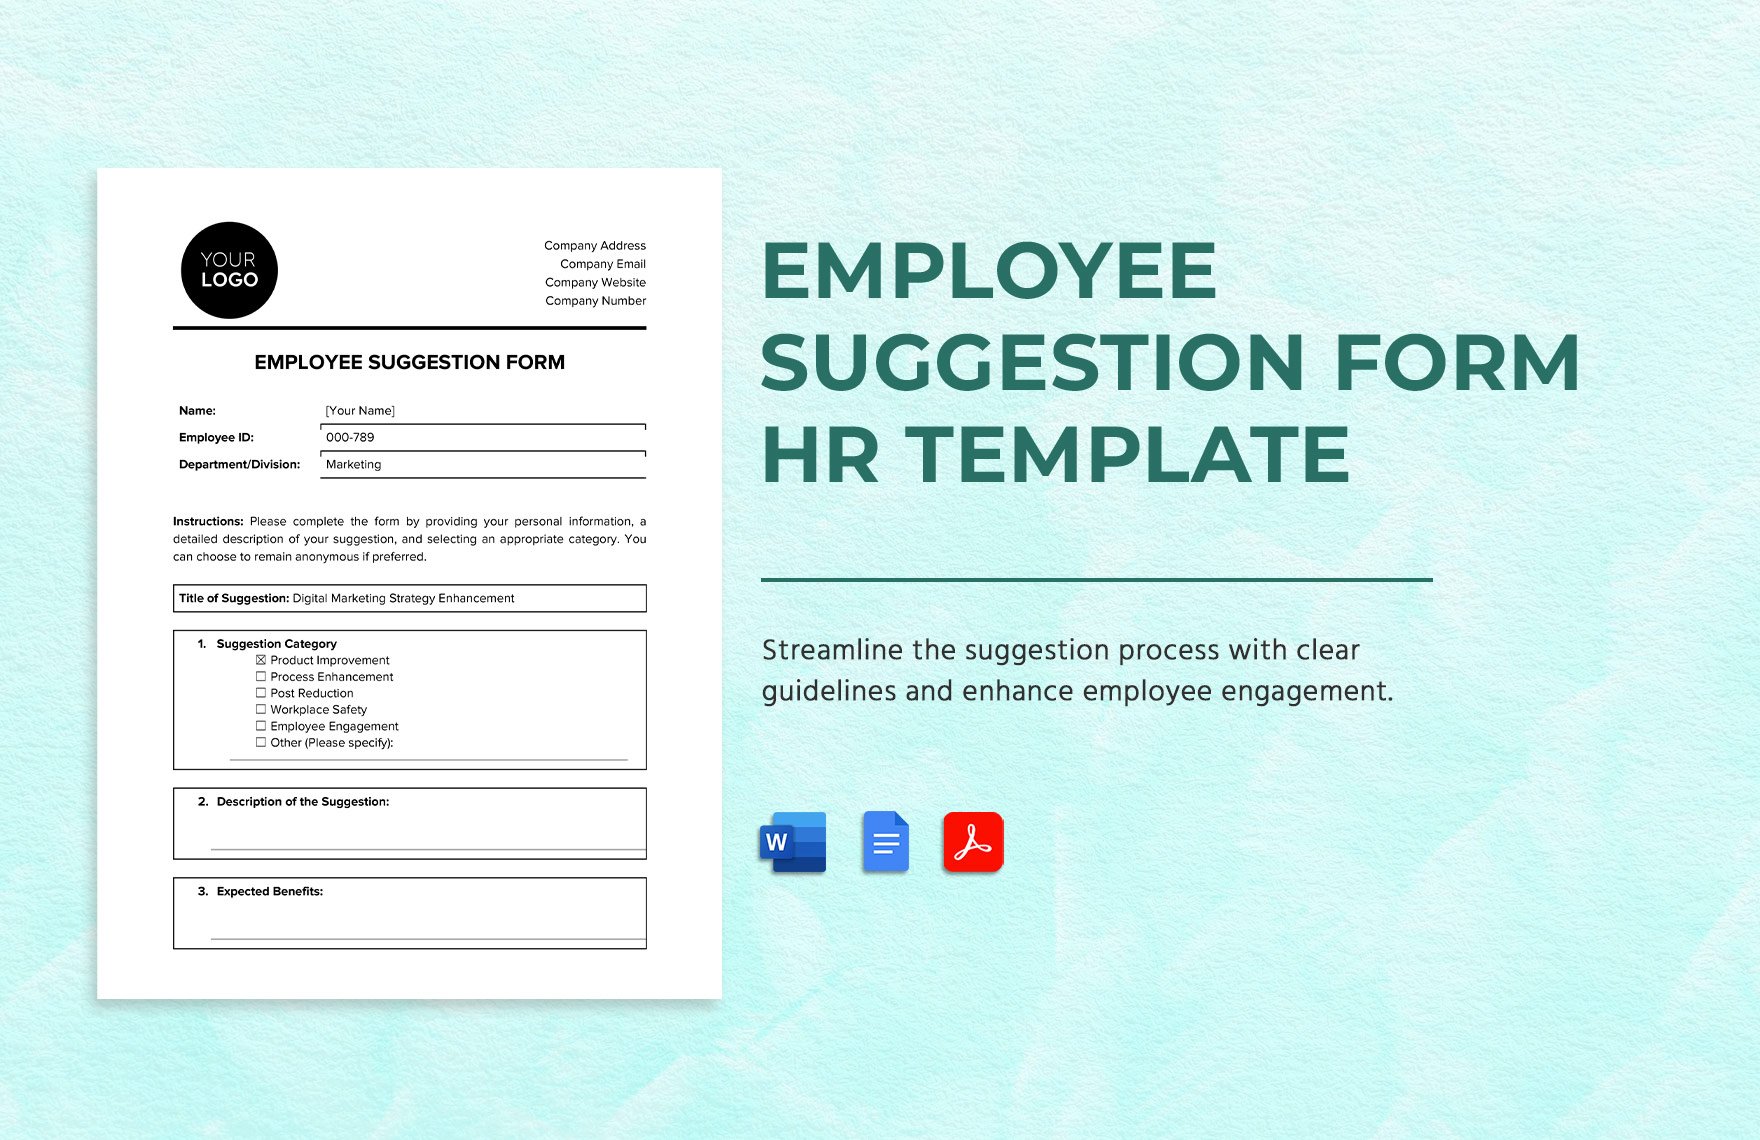 Employee Suggestion Form HR Template in Word, Google Docs, PDF